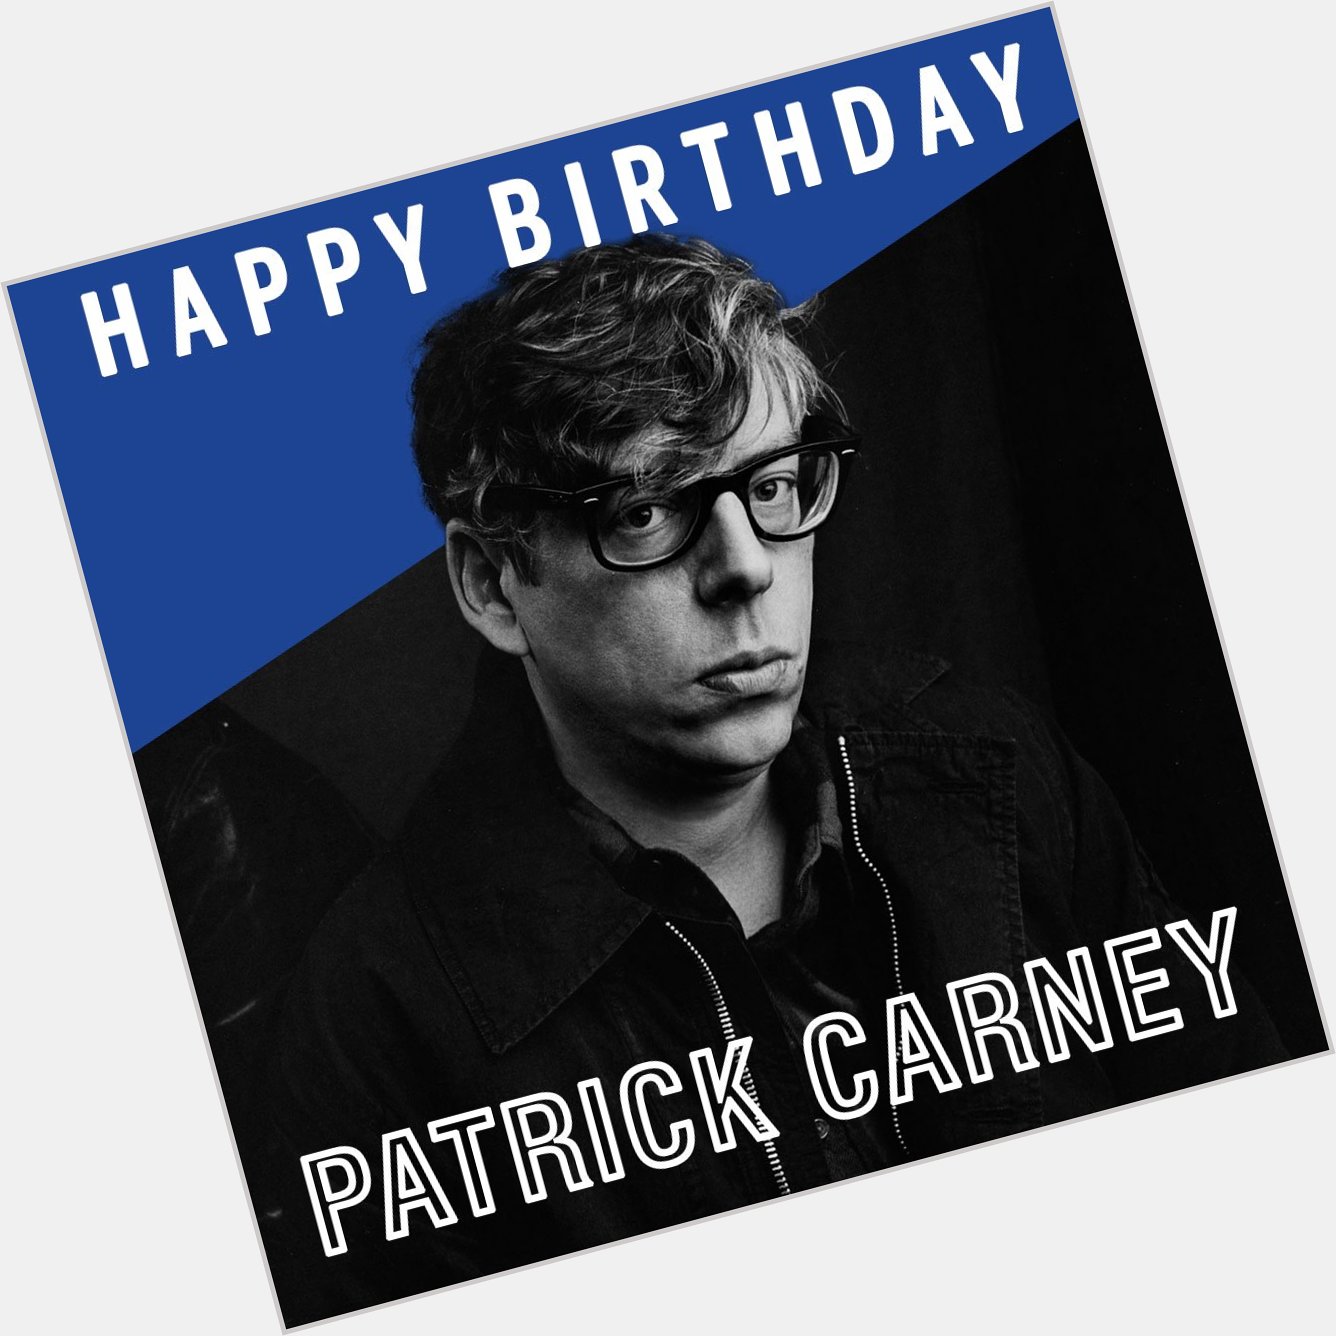 Happy birthday to Patrick Carney of The Black Keys!! Can\t wait to see you November 23! 